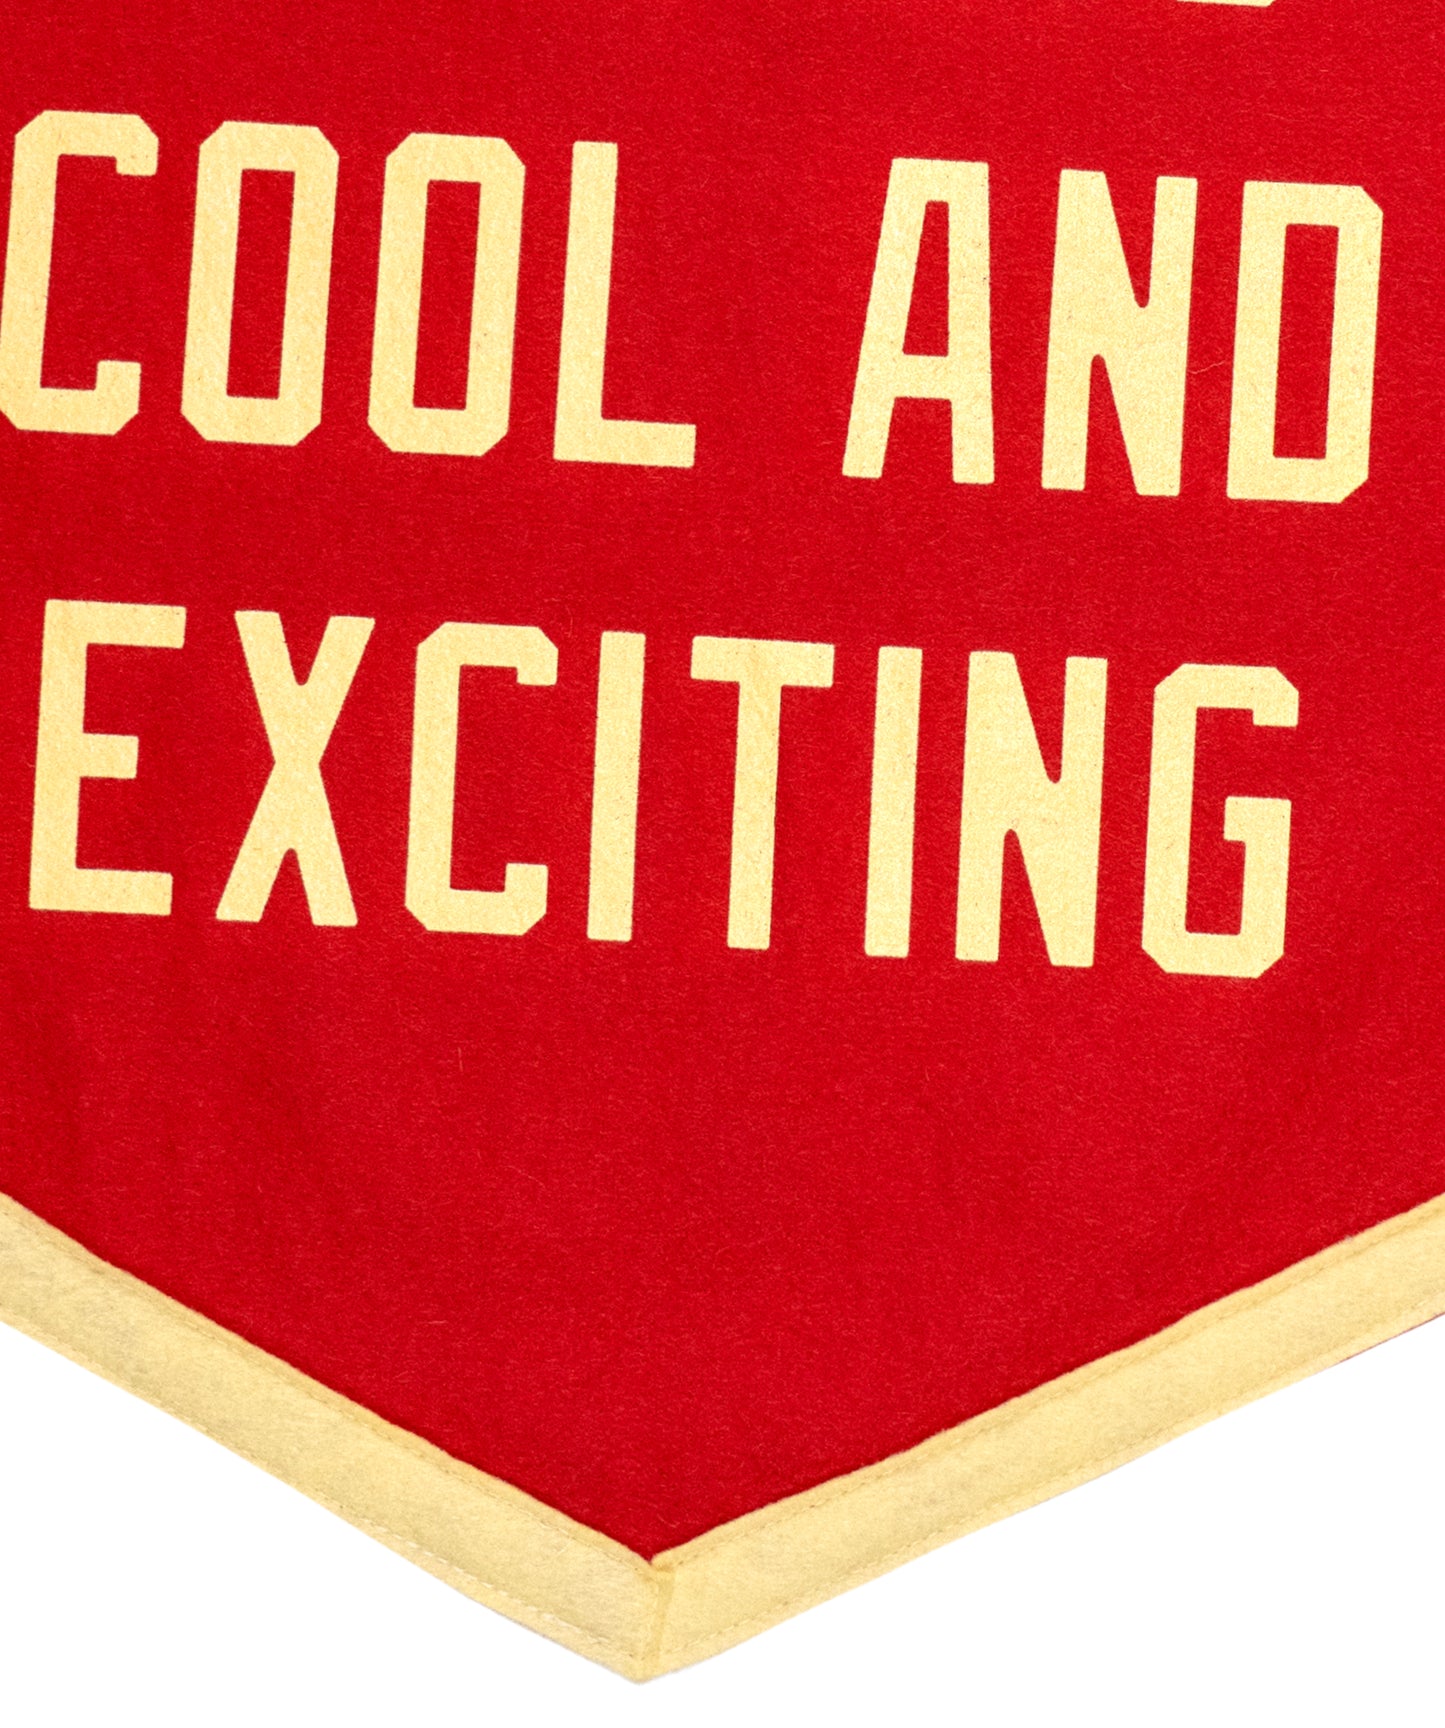 It's All So Cool And Exciting Camp Flag • Sylvan Esso x Oxford Pennant